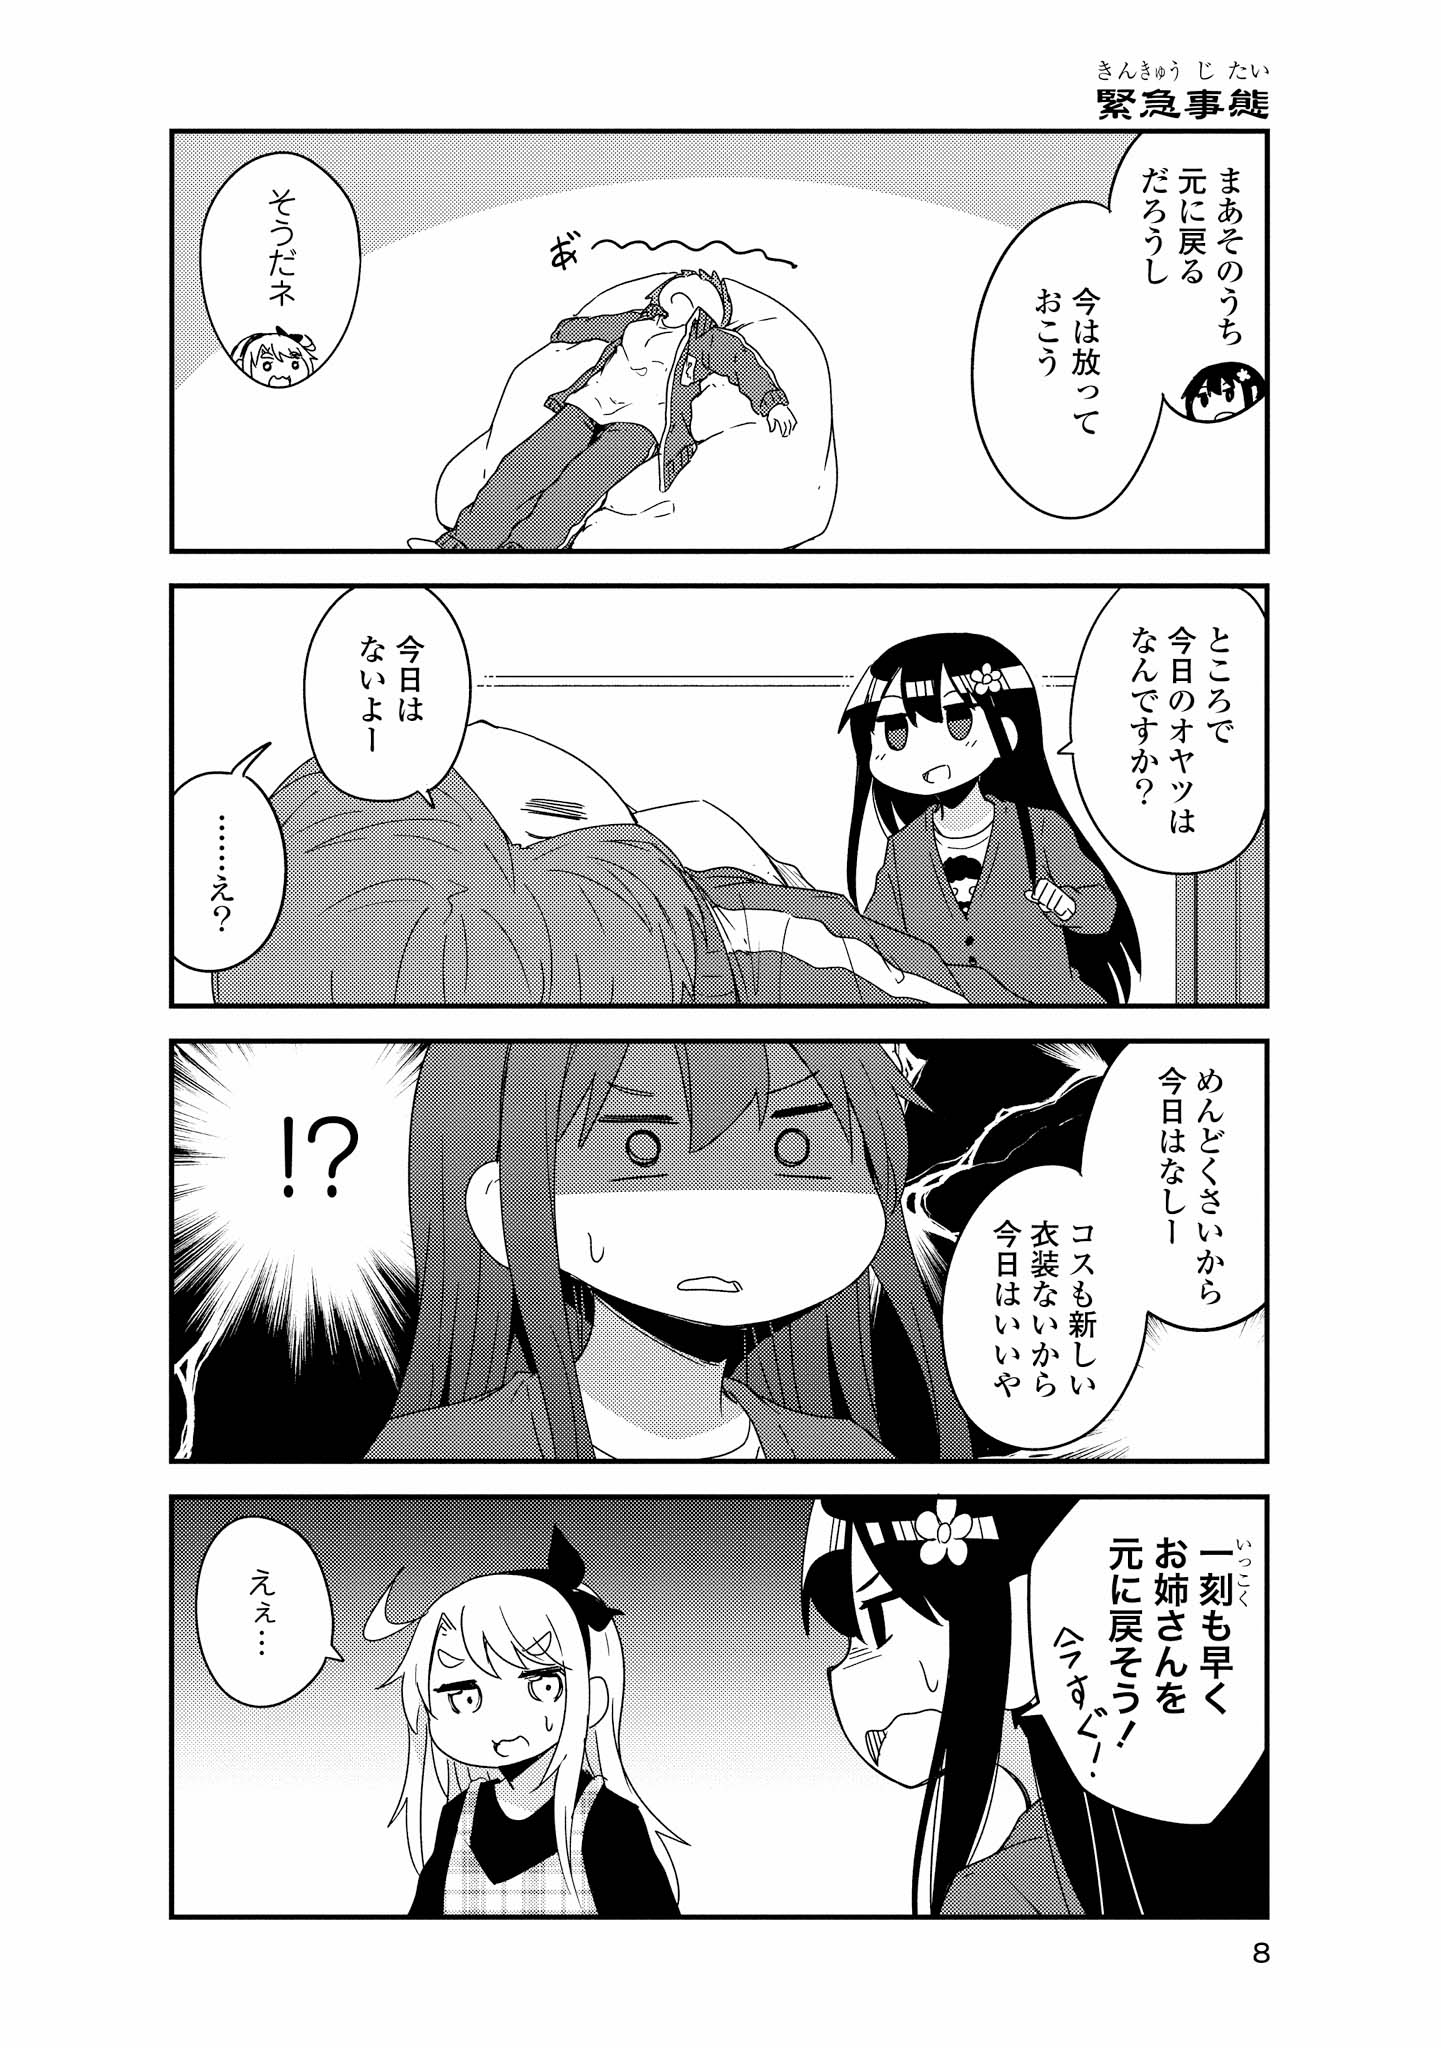 Wataten! An Angel Flew Down to Me 私に天使が舞い降りた！ 第37話 - Page 4